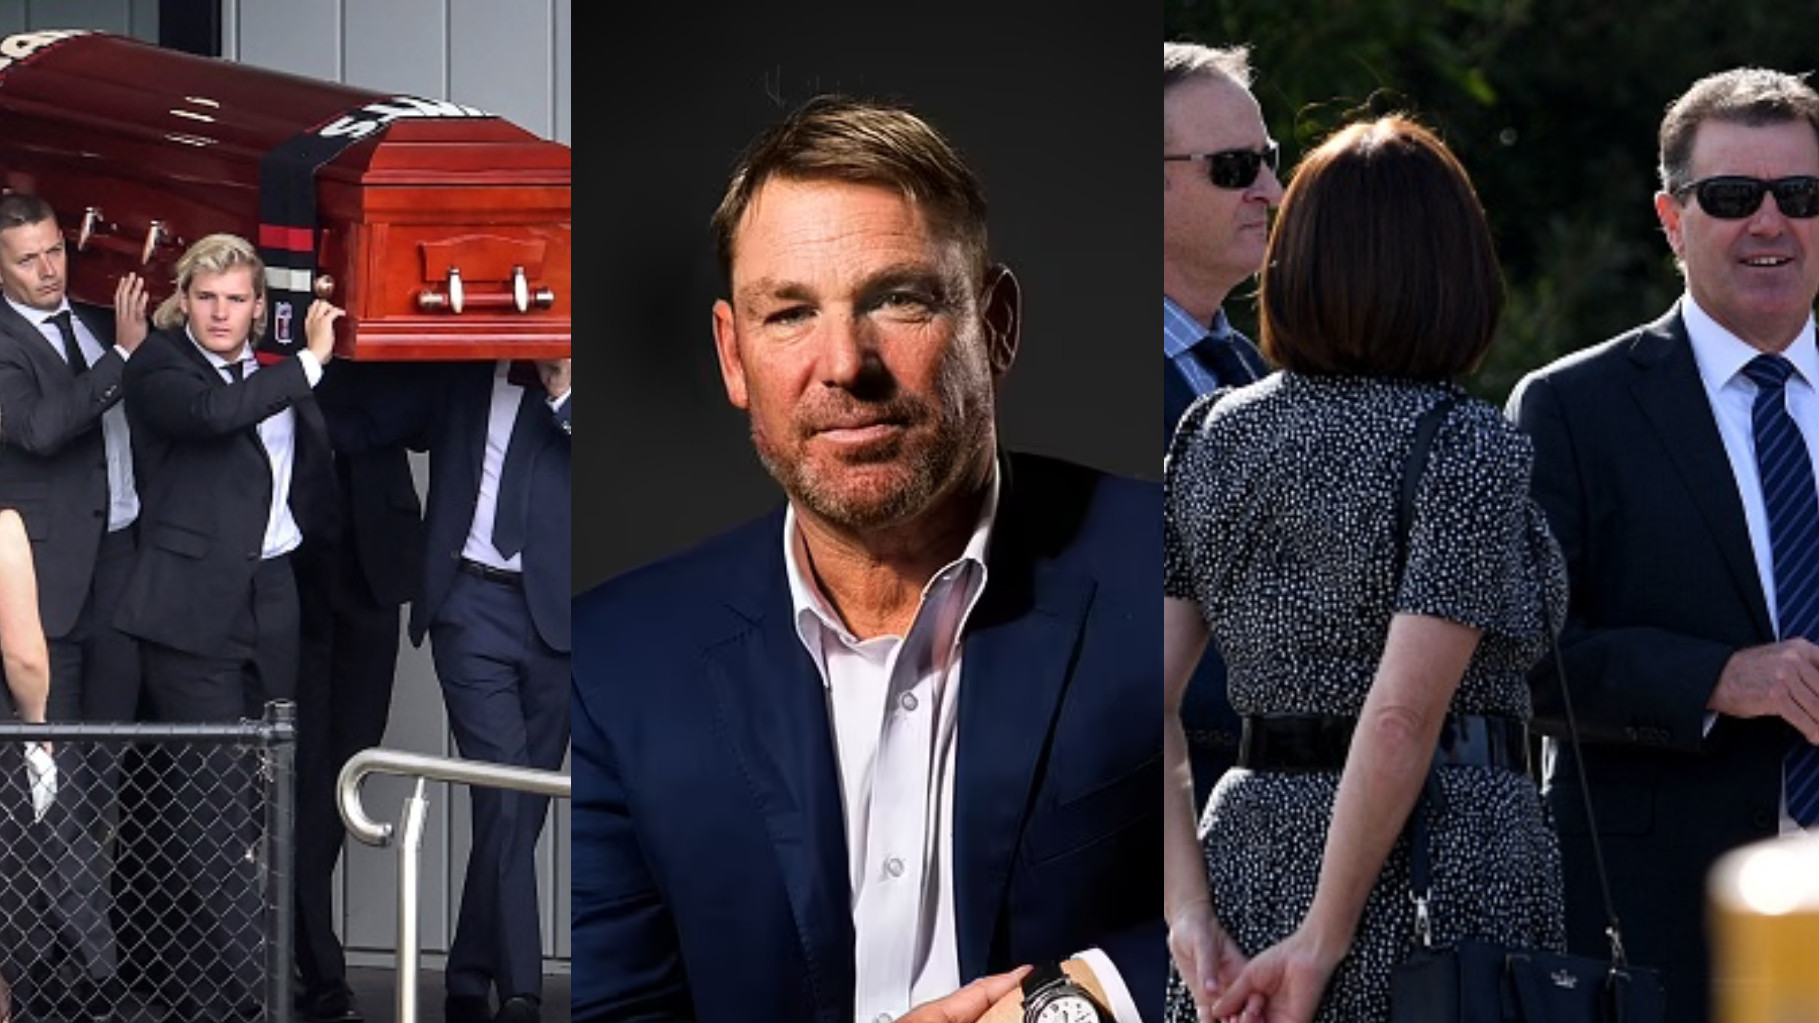 Shane Warne’s family and friends bid farewell to him in a private funeral